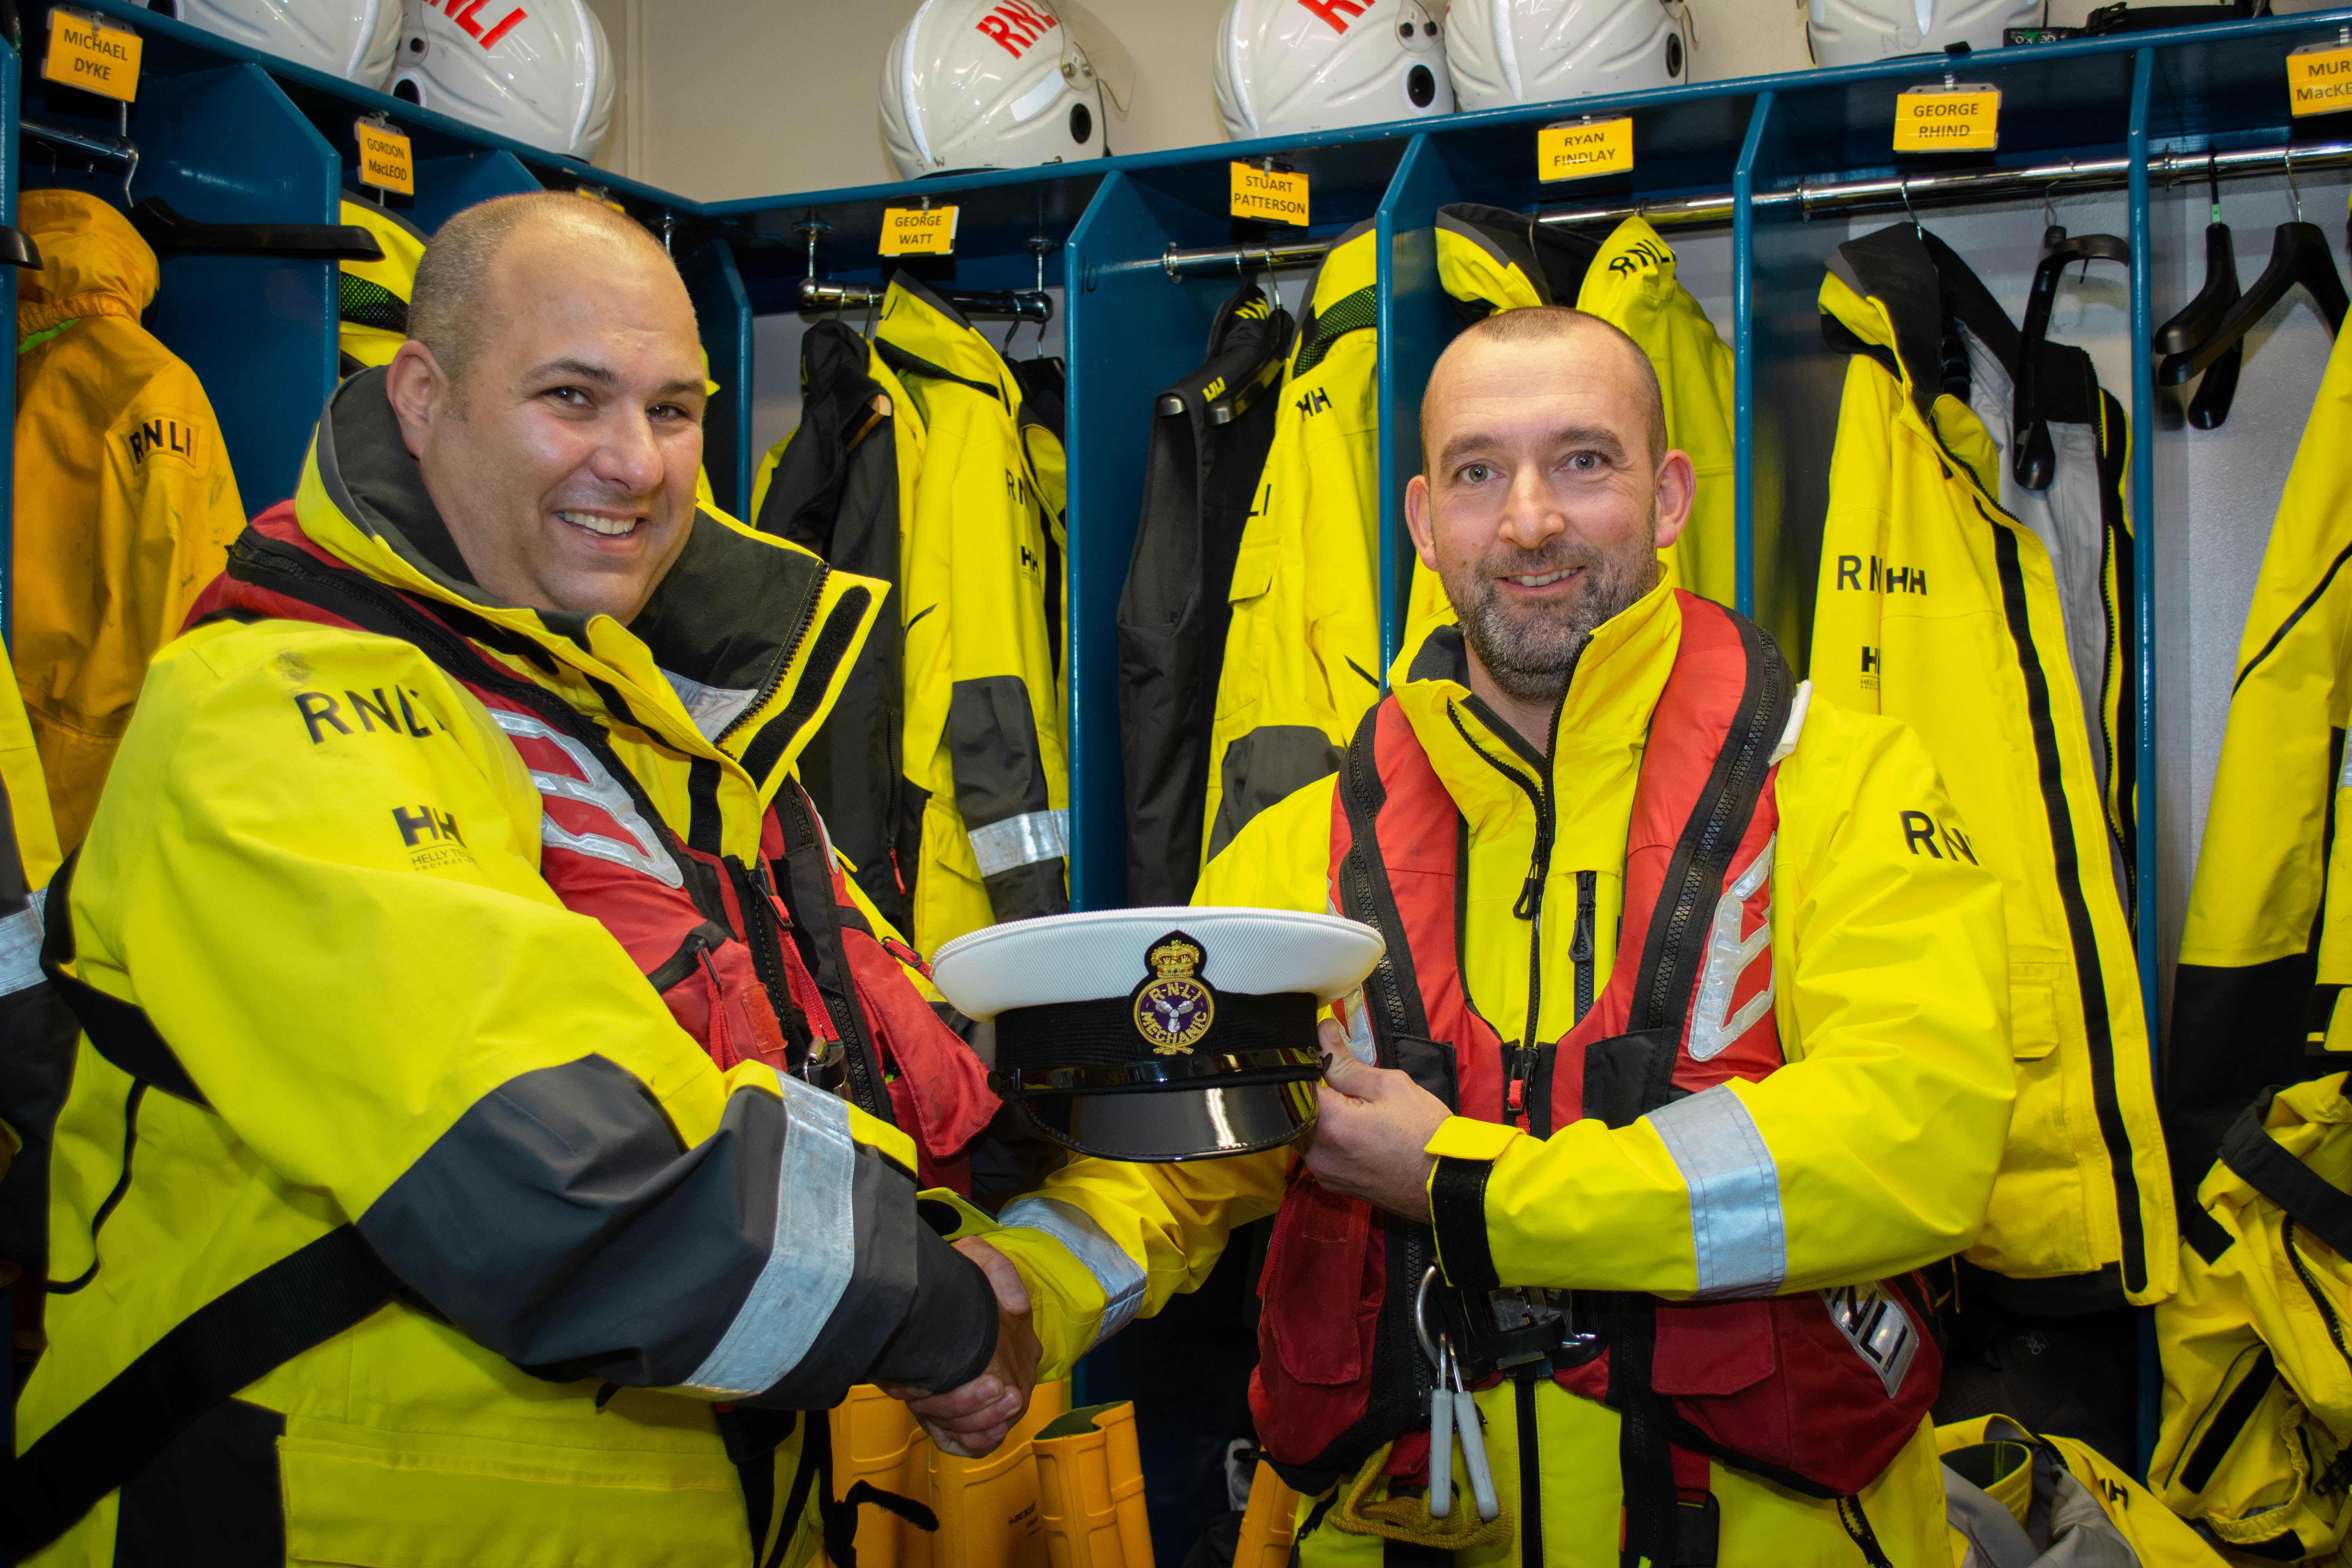 Davie Weir receives his Boat's Officer's hat from Lifeboat operations manager Jurgen Wahle